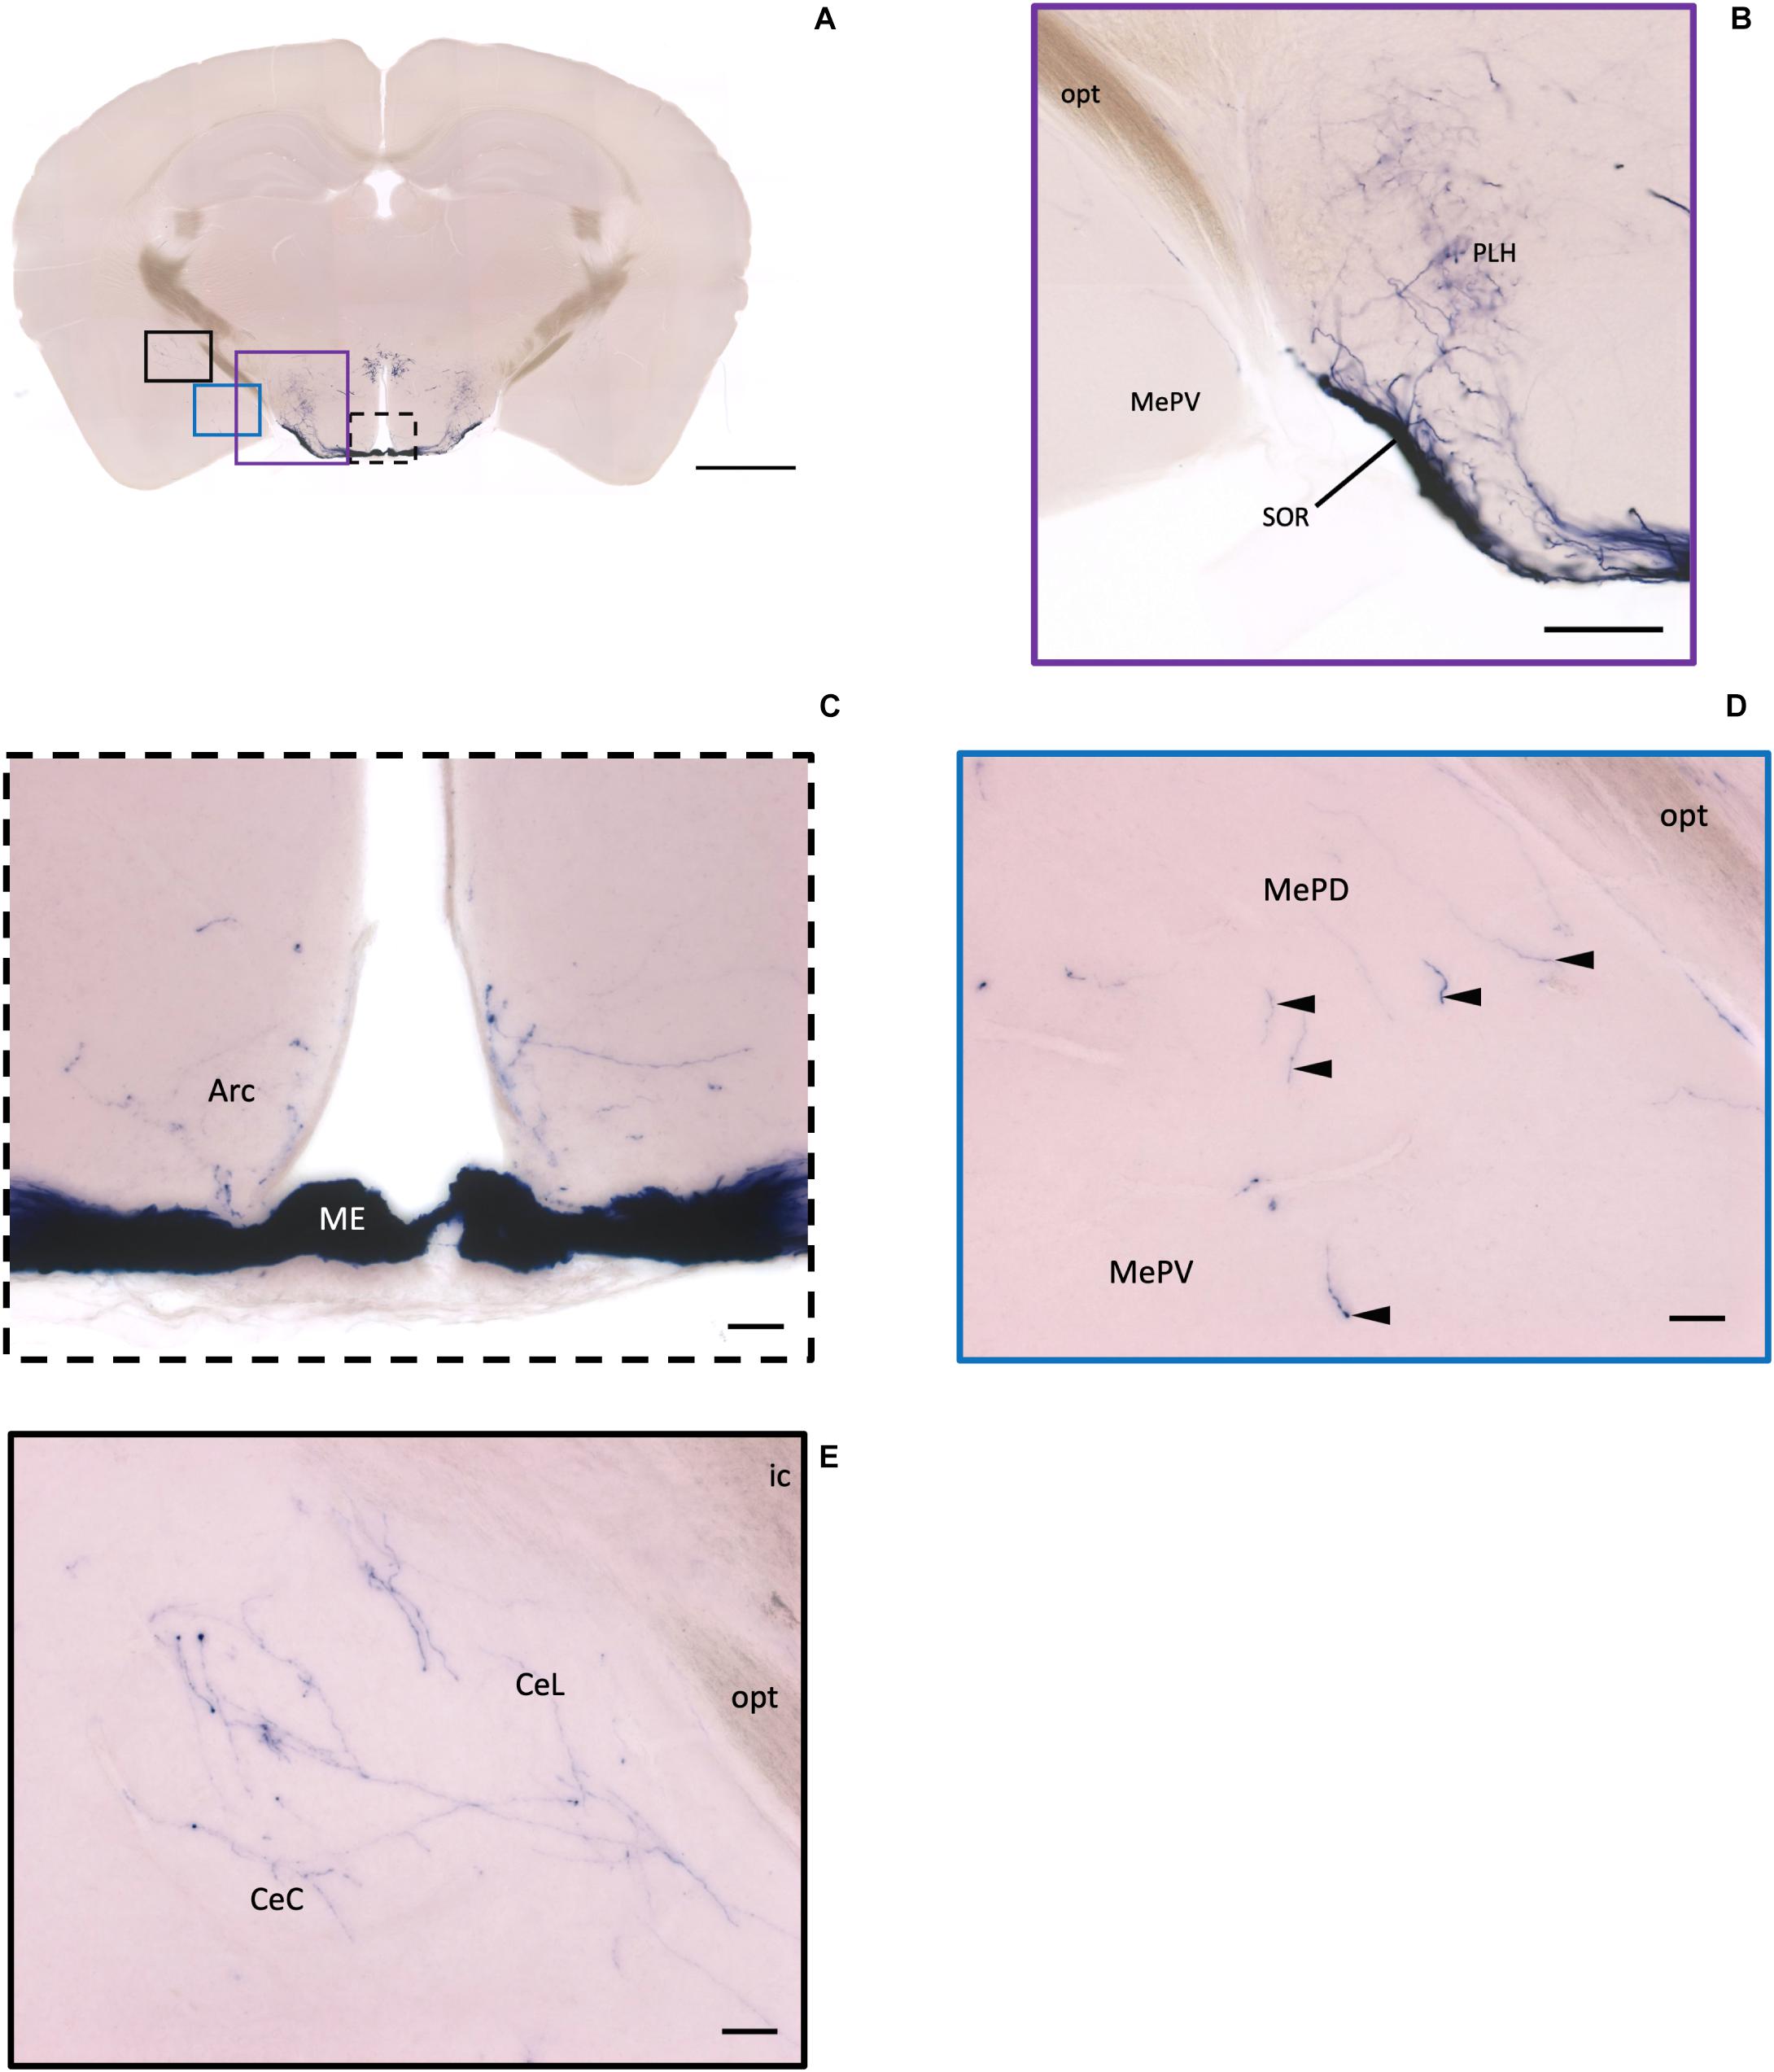 PVN-mPFC OXT projections are necessary for anti-anxiety in PMS rats a